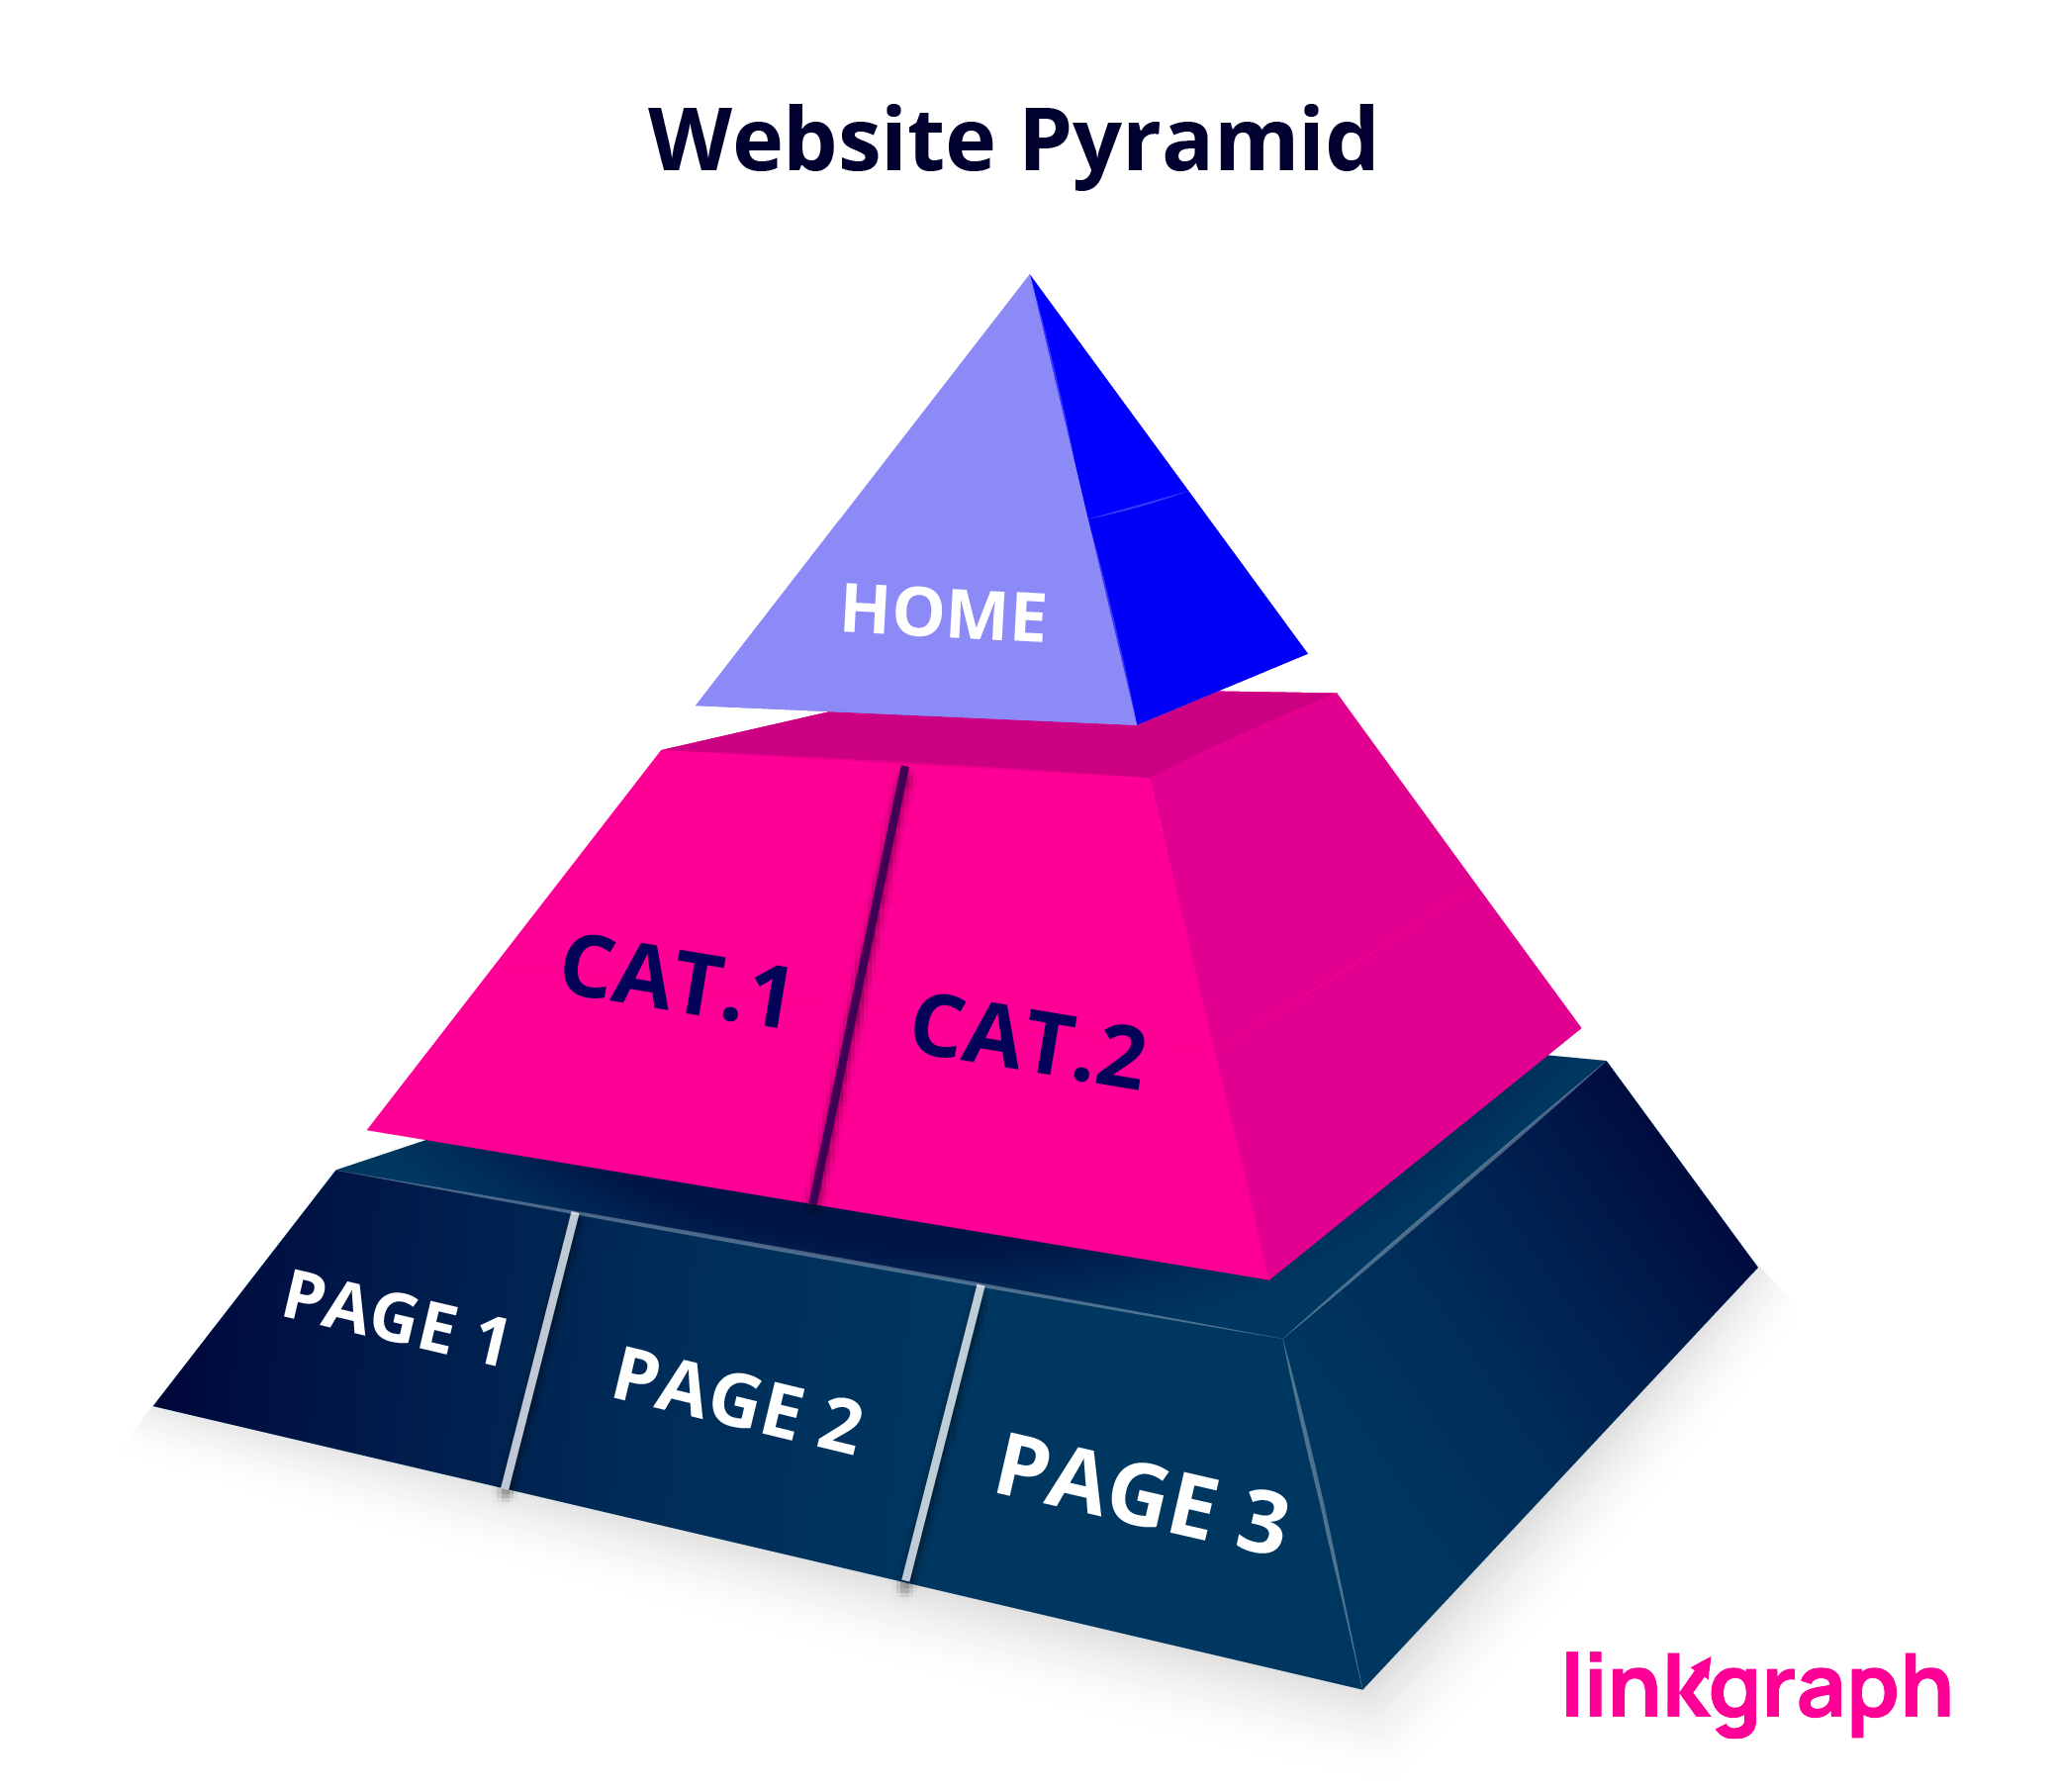 Illustration of a pyramid with different levels of a website architecture displayed across the levels of the pyramid